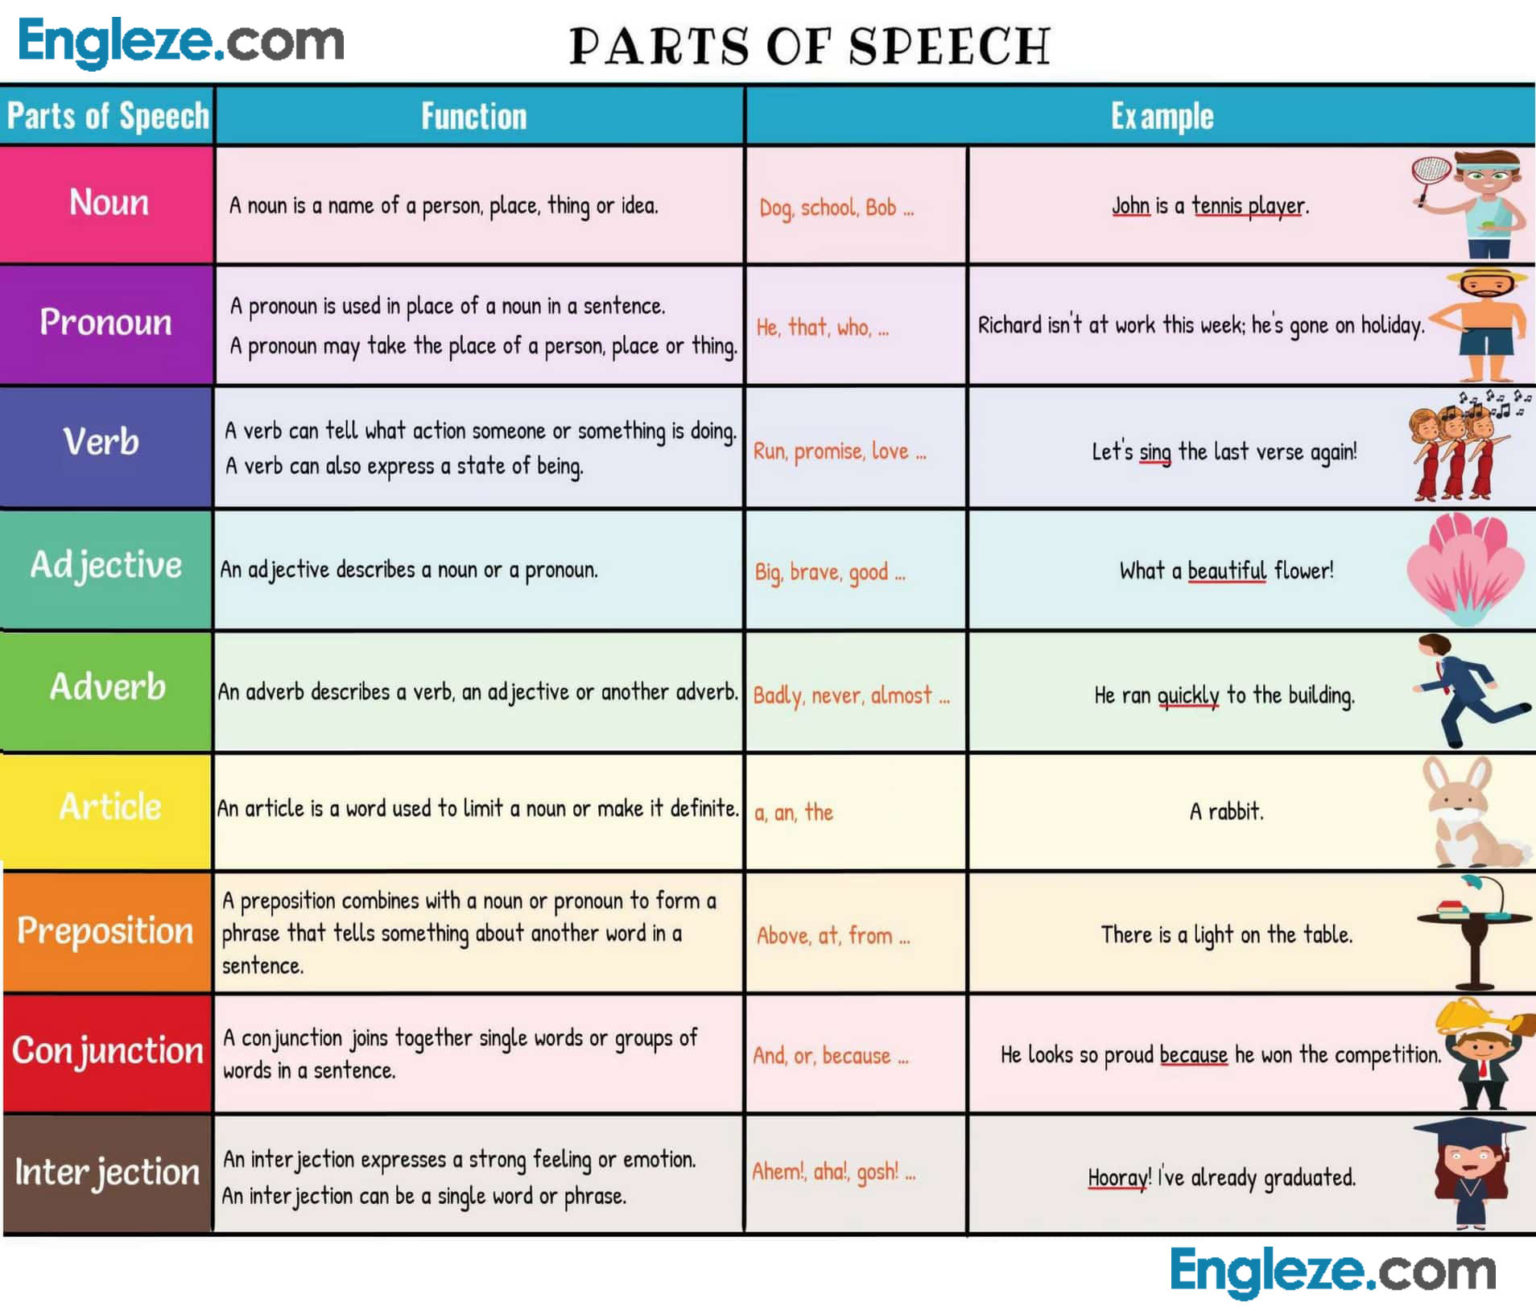 Parts Of Speech Definition And Useful Examples In English Engleze